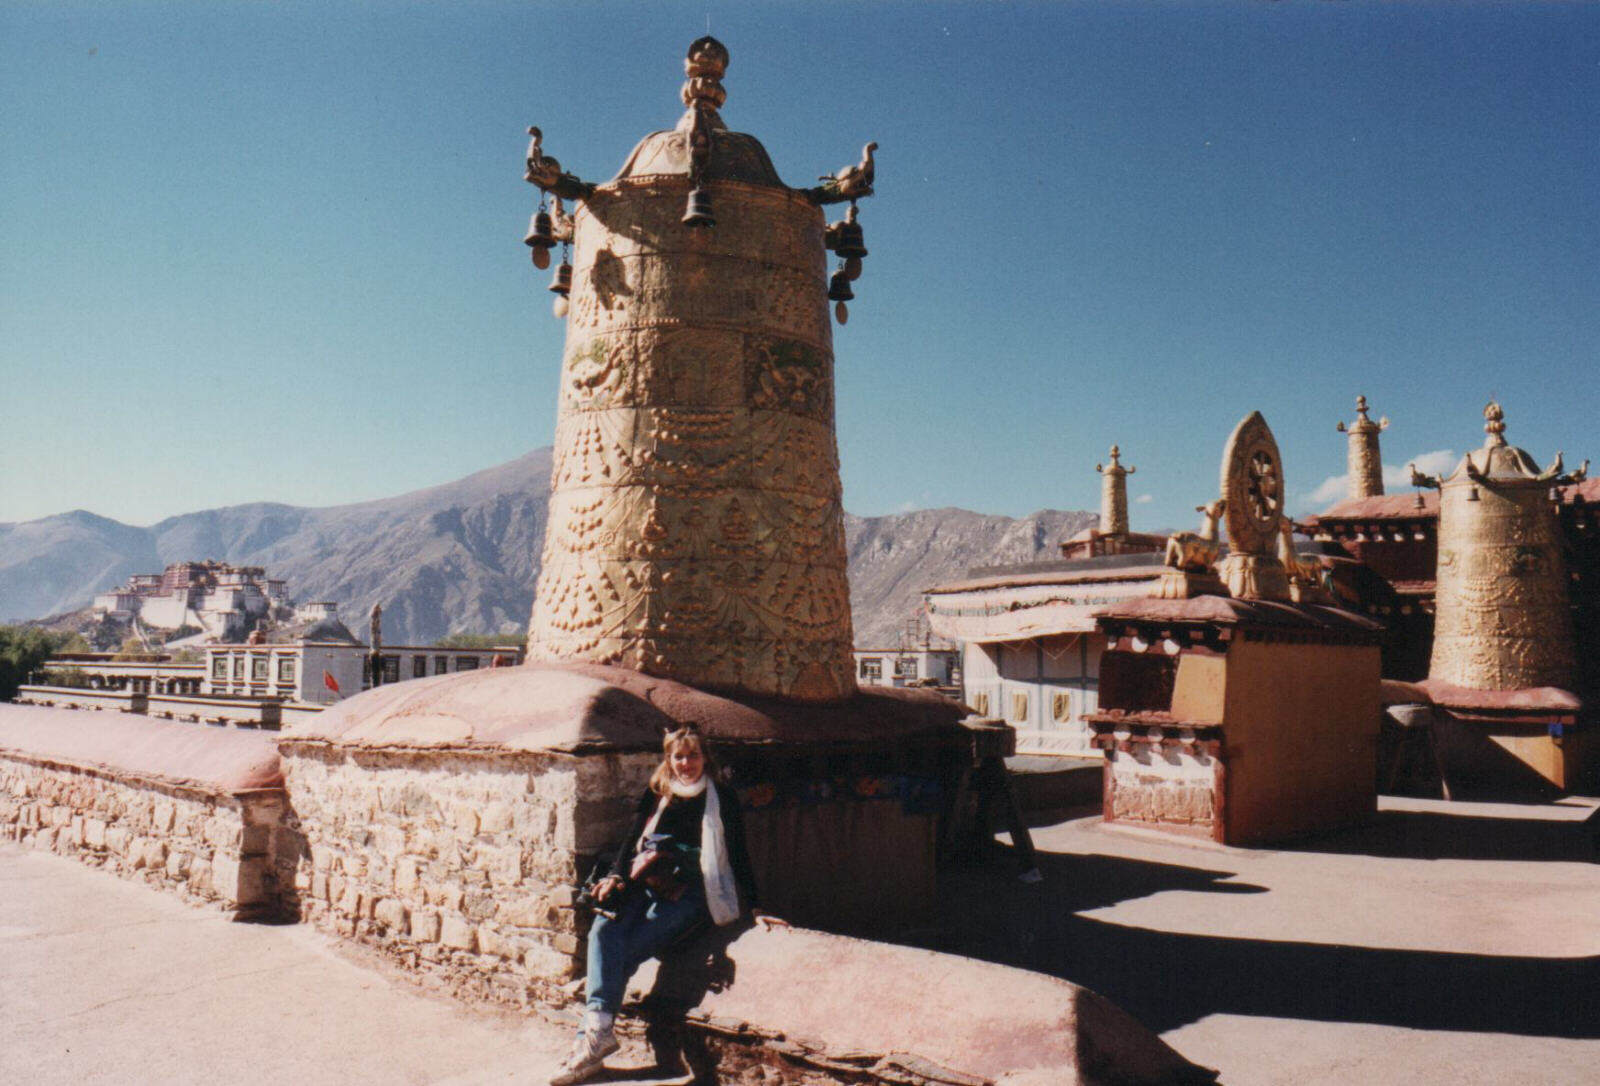 On the roof of the Jokhang in Lhasa Tibet